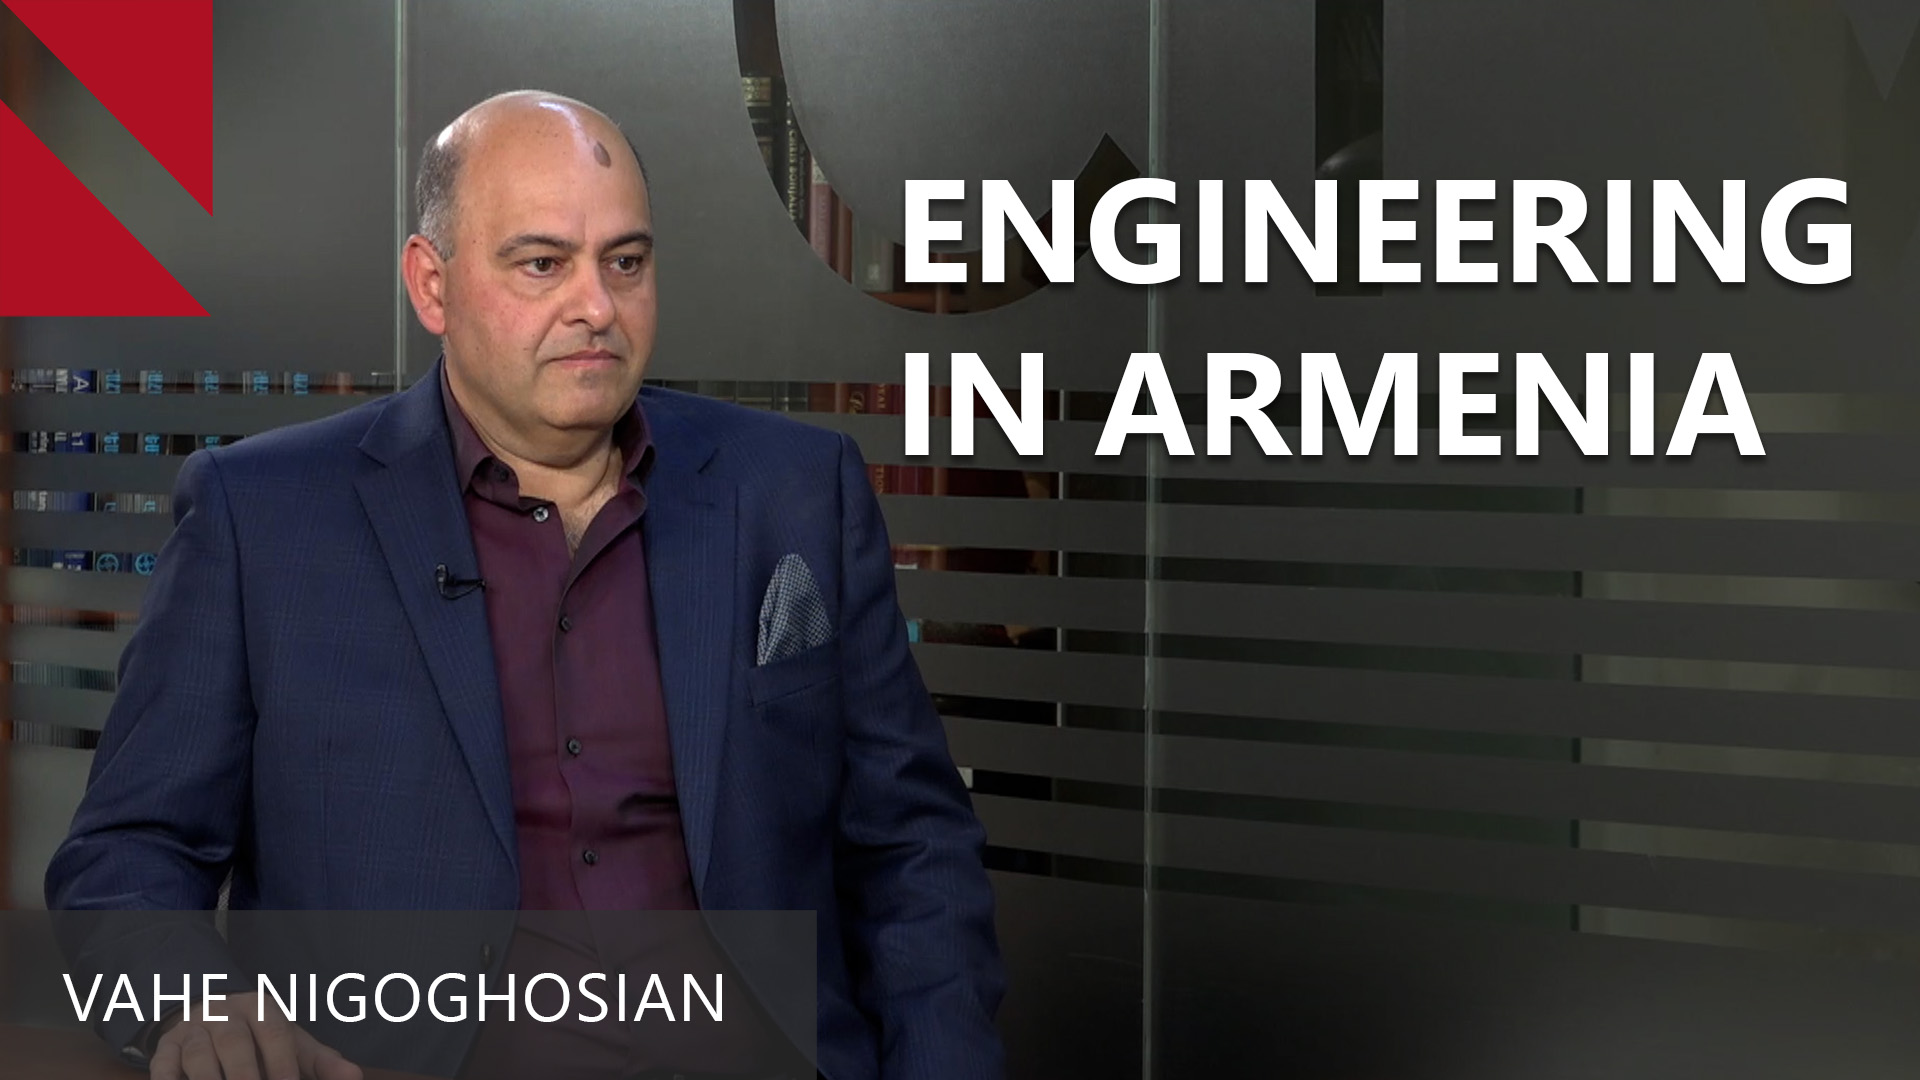 “Armenia Could Become a World Engineering Hub”